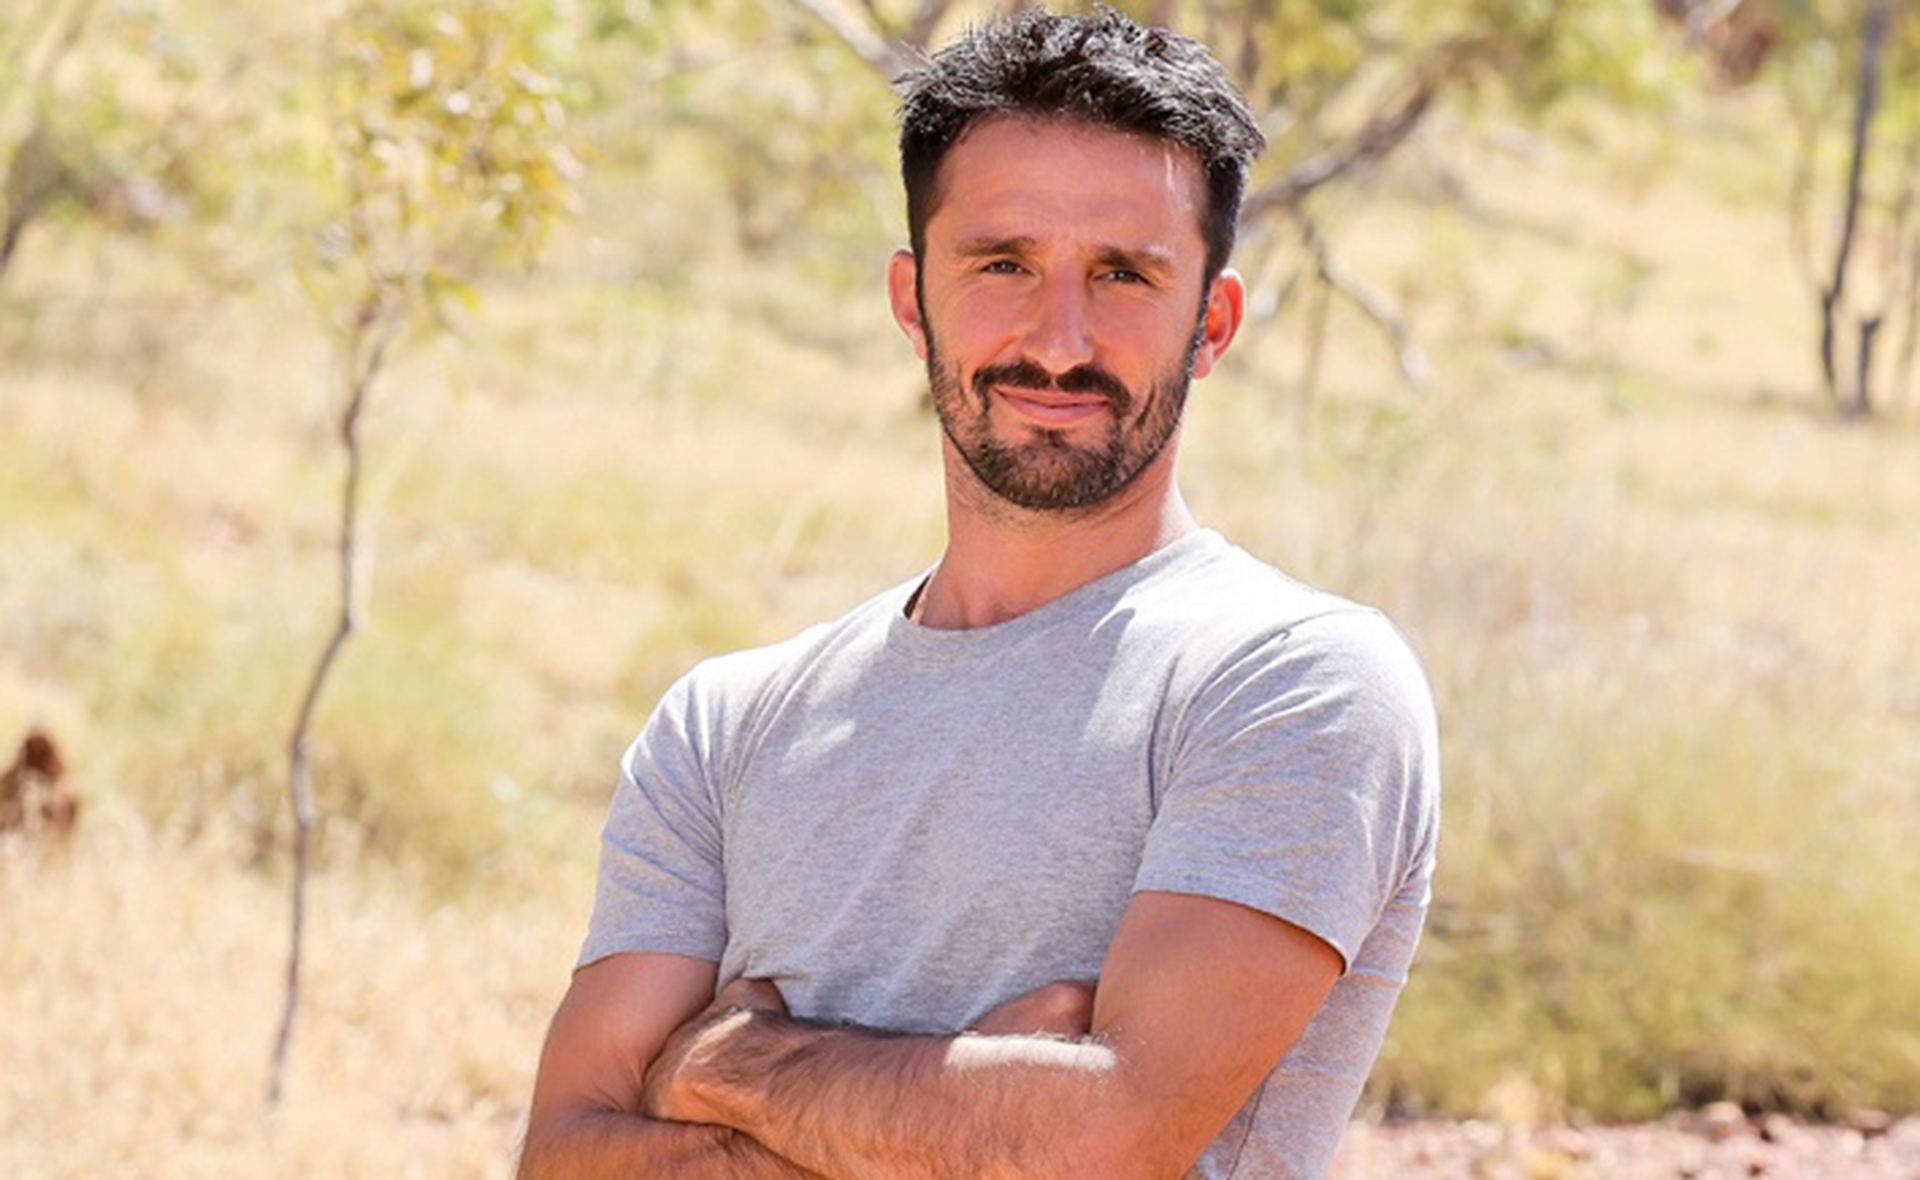 Andrew reveals his one massive regret on Australian Survivor: “I’ll live with it until the day I die”